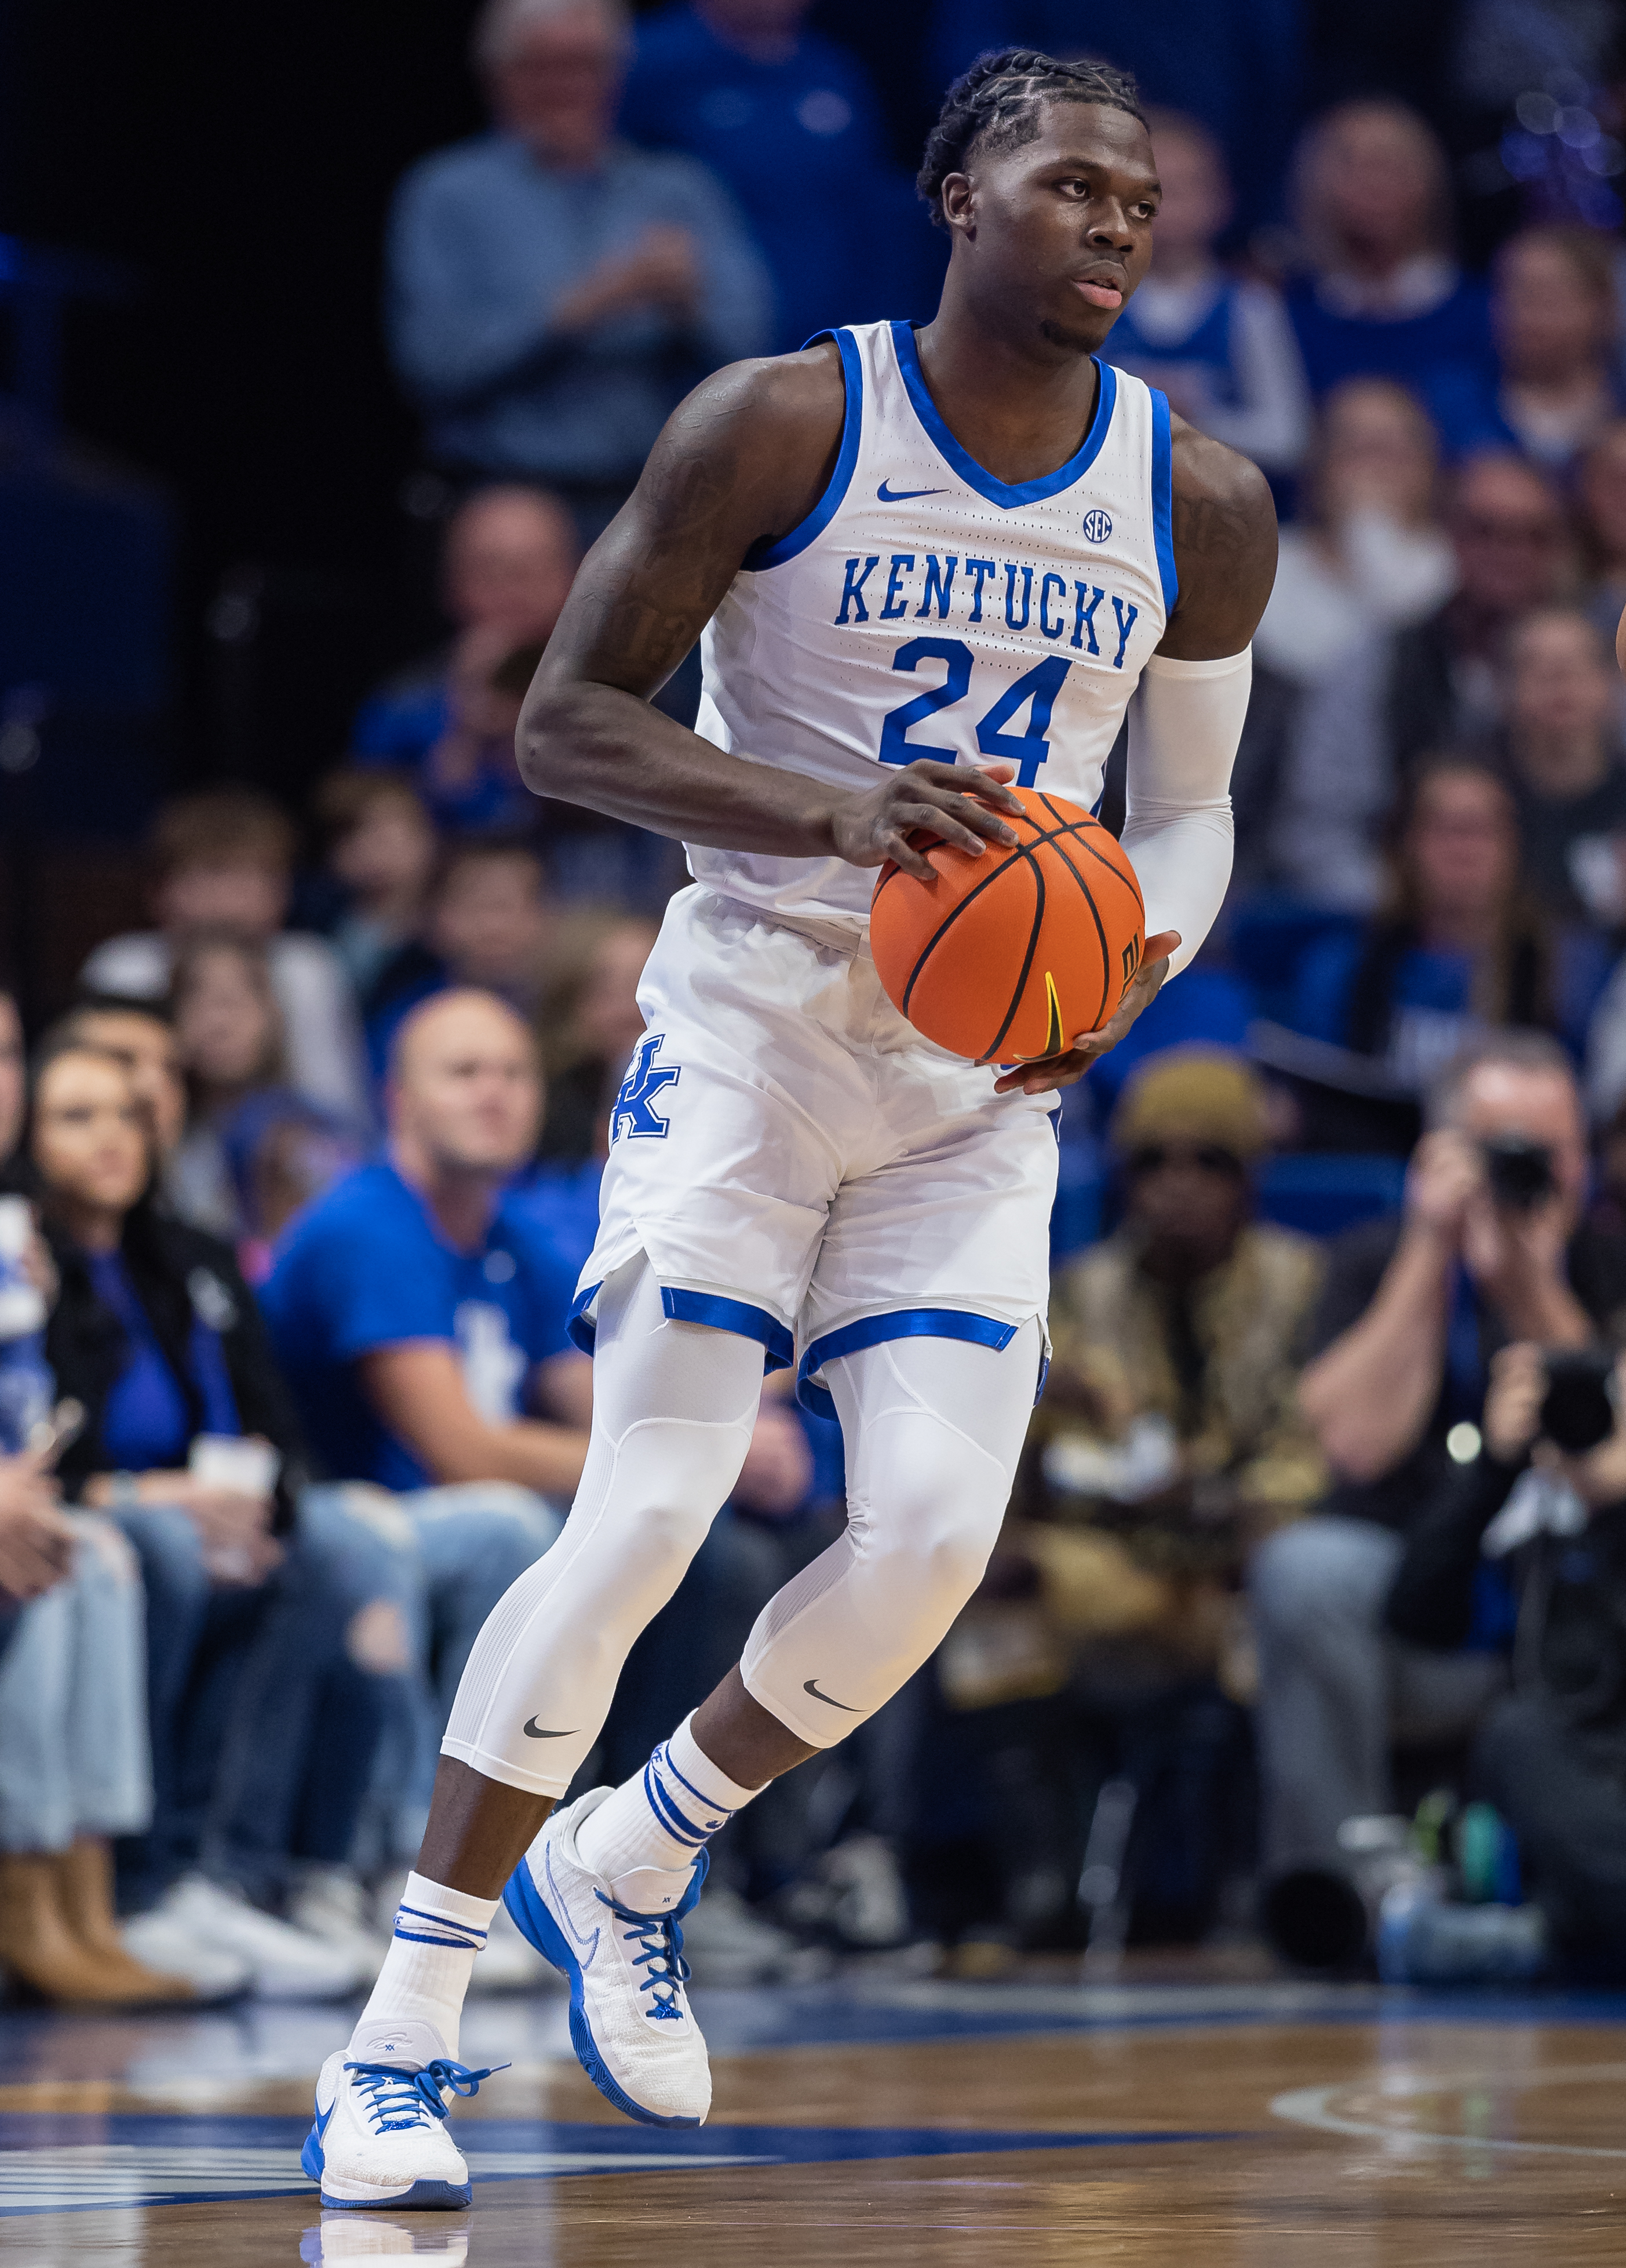 Chris Livingston #24 of the Kentucky Wildcats is seen during the game against the Florida Gators at Rupp Arena on February 4, 2023 in Lexington, Kentucky.